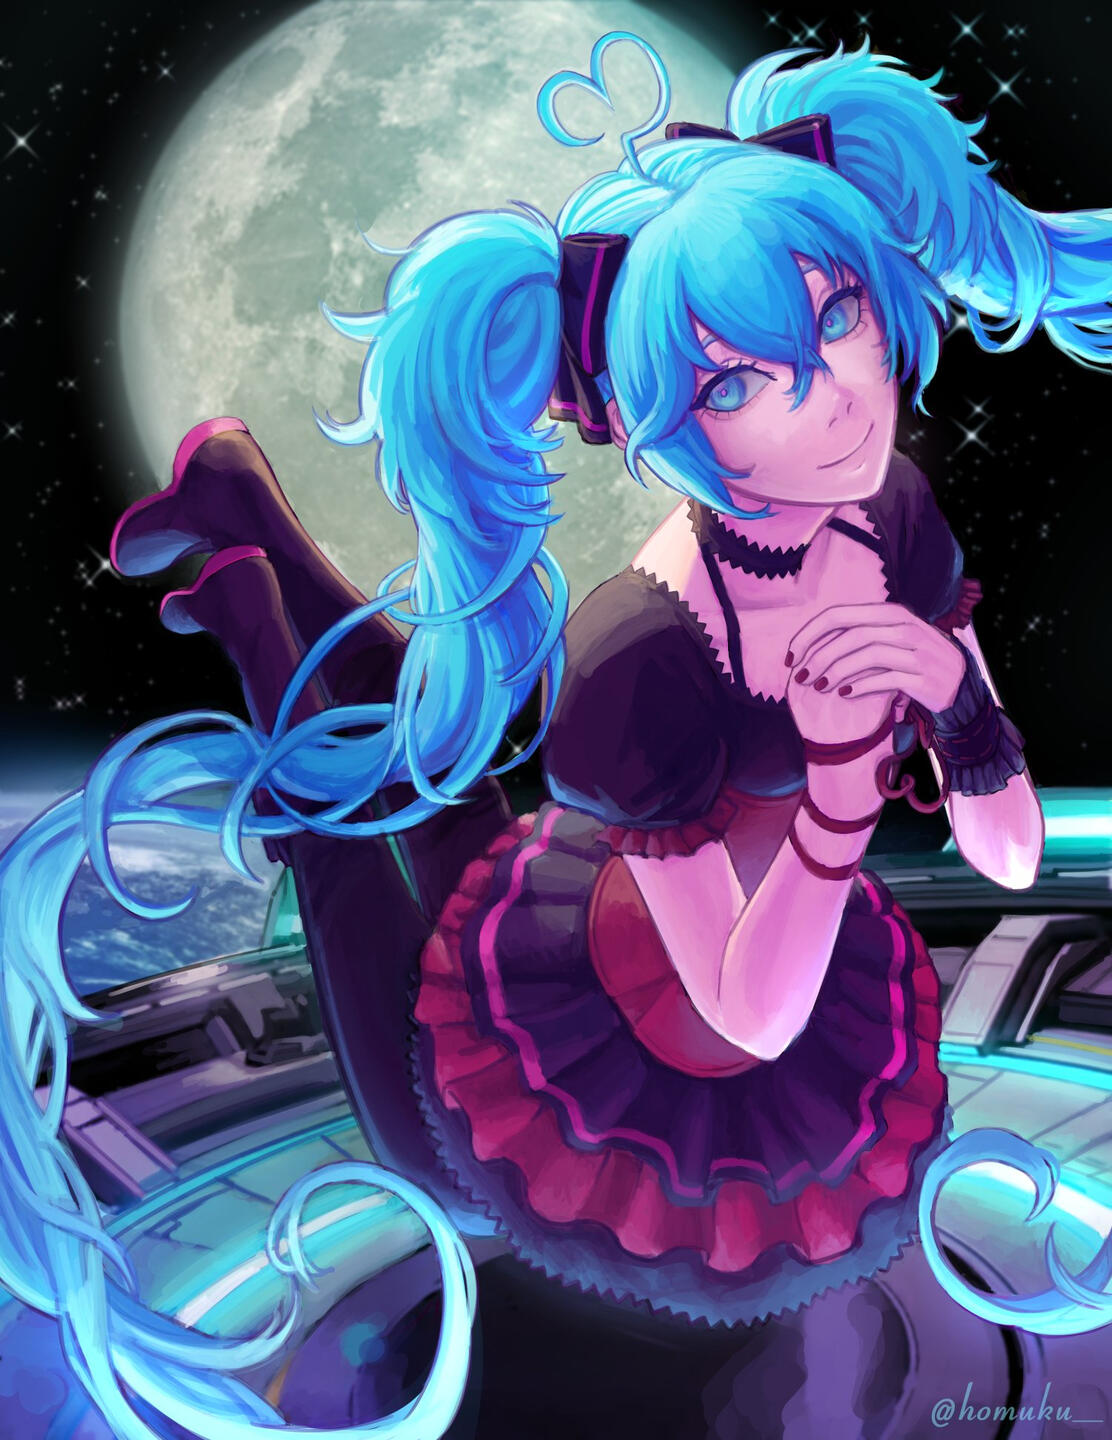 fanart of vocaloidP's 1/6 out of the gravity